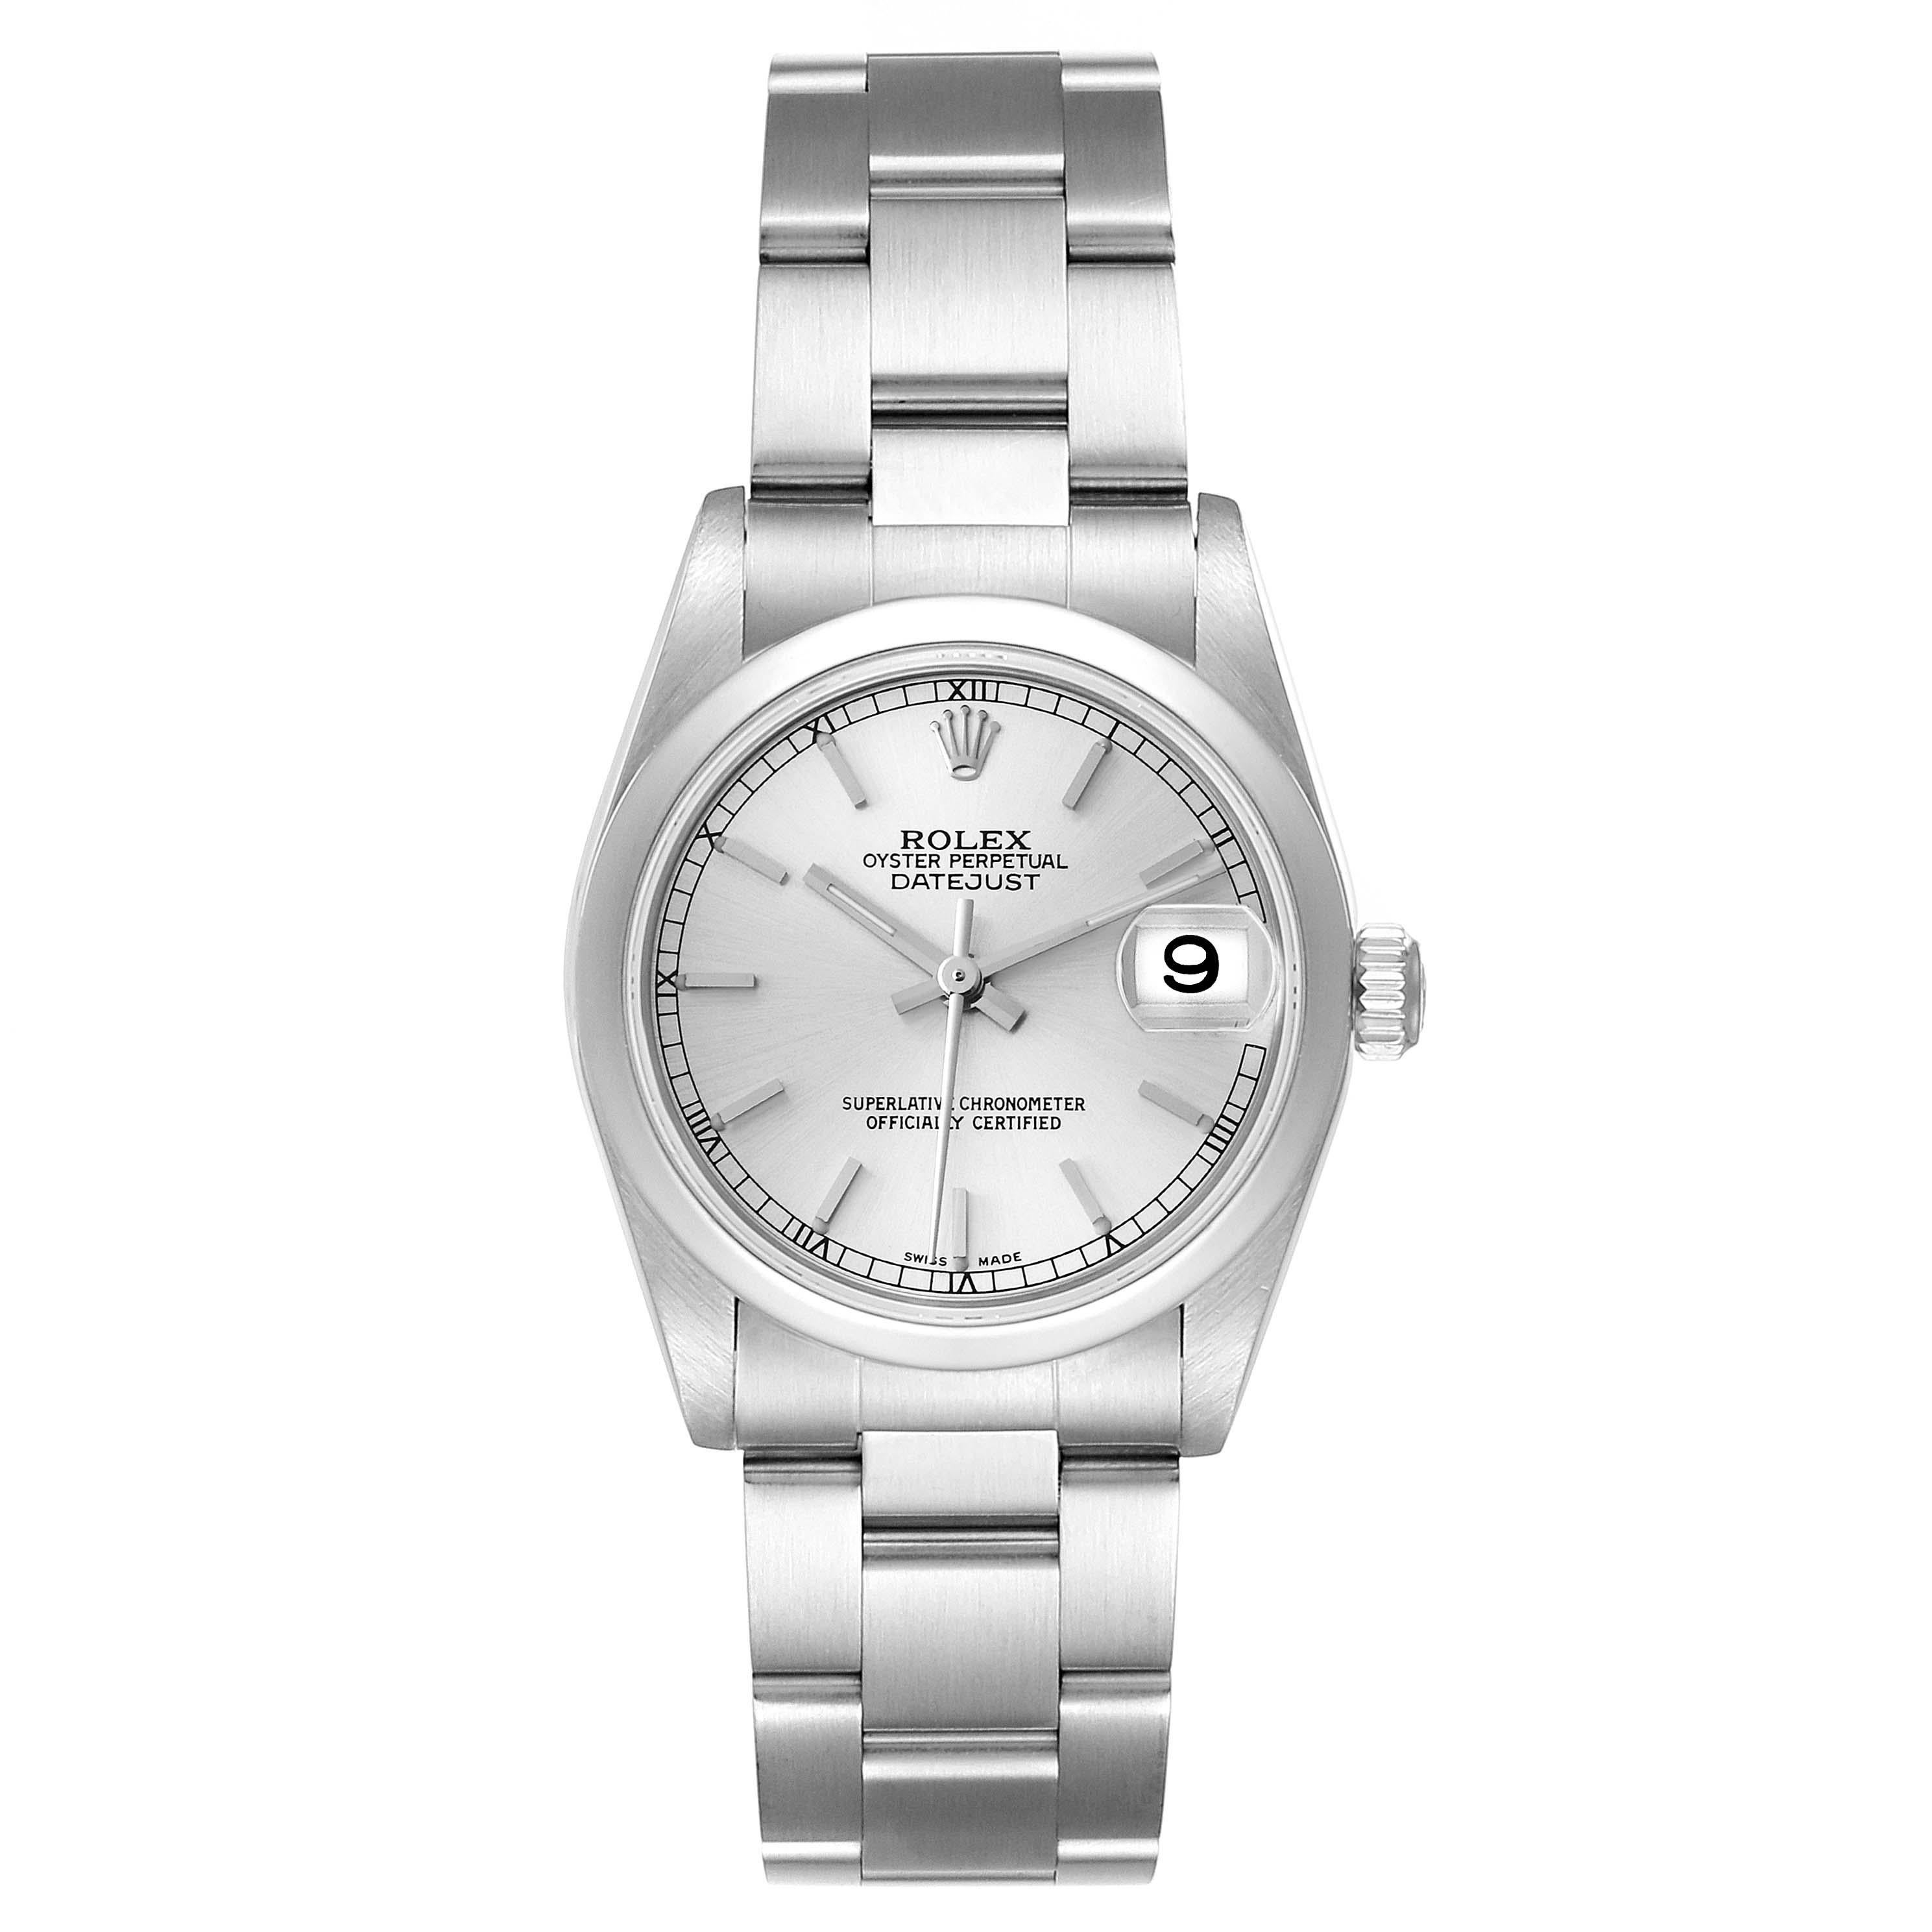 Rolex Datejust 31 Midsize Silver Dial Steel Ladies Watch 78240 Box Papers. Officially certified chronometer self-winding movement. Stainless steel oyster case 31.0 mm in diameter. Rolex logo on a crown. Stainless steel smooth domed bezel. Scratch